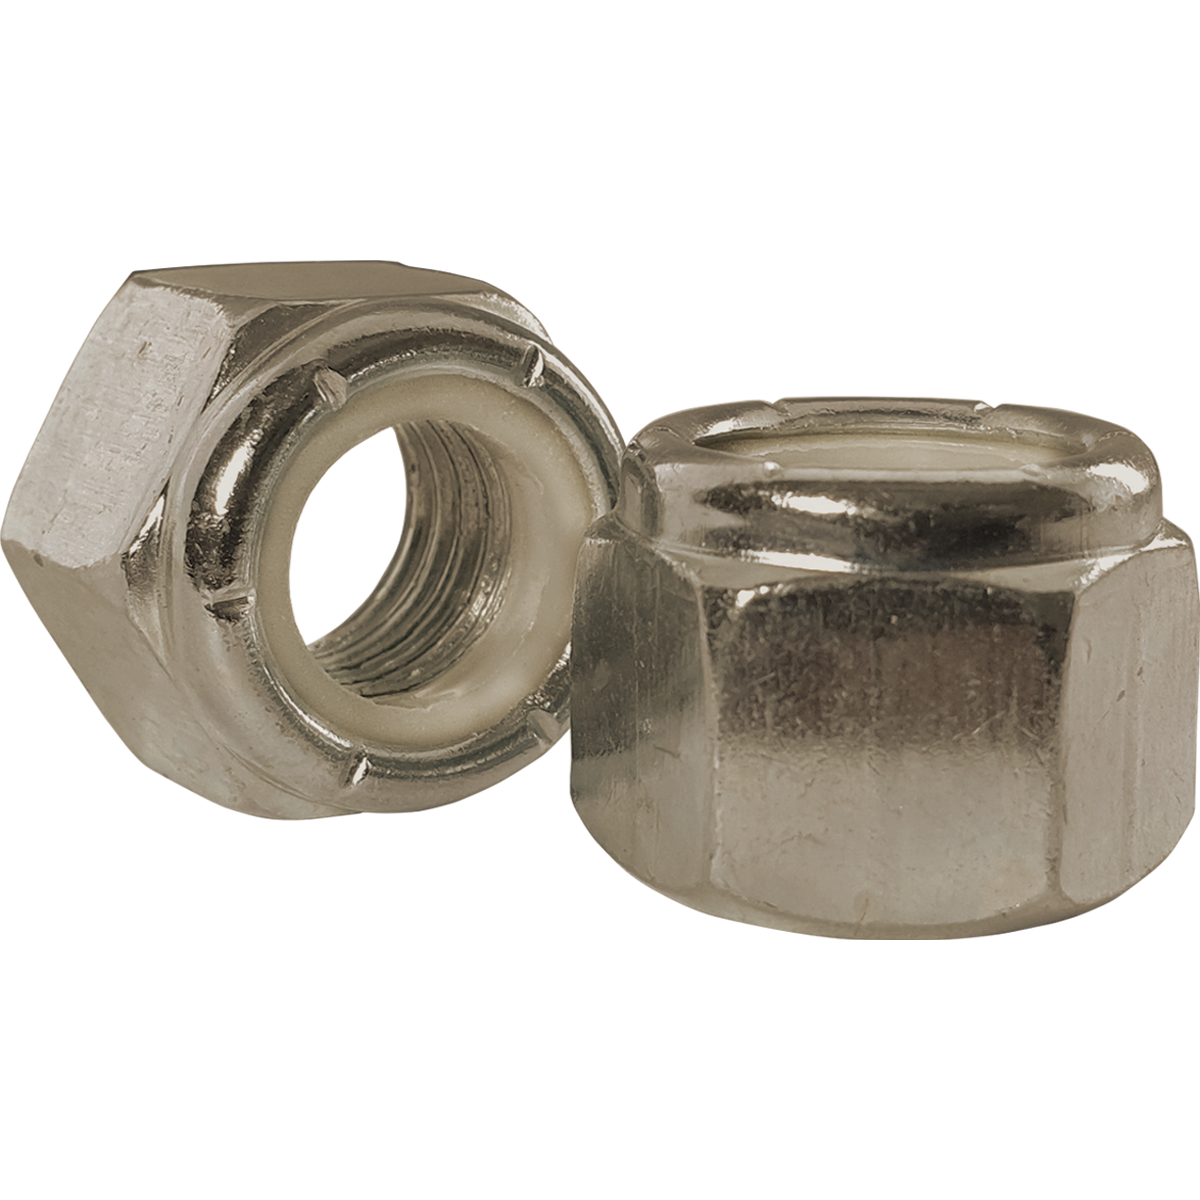 UNC (Imperial Unified Coarse Thread), A2 stainless steel, nyloc nuts, also known as nylon insert nuts. 